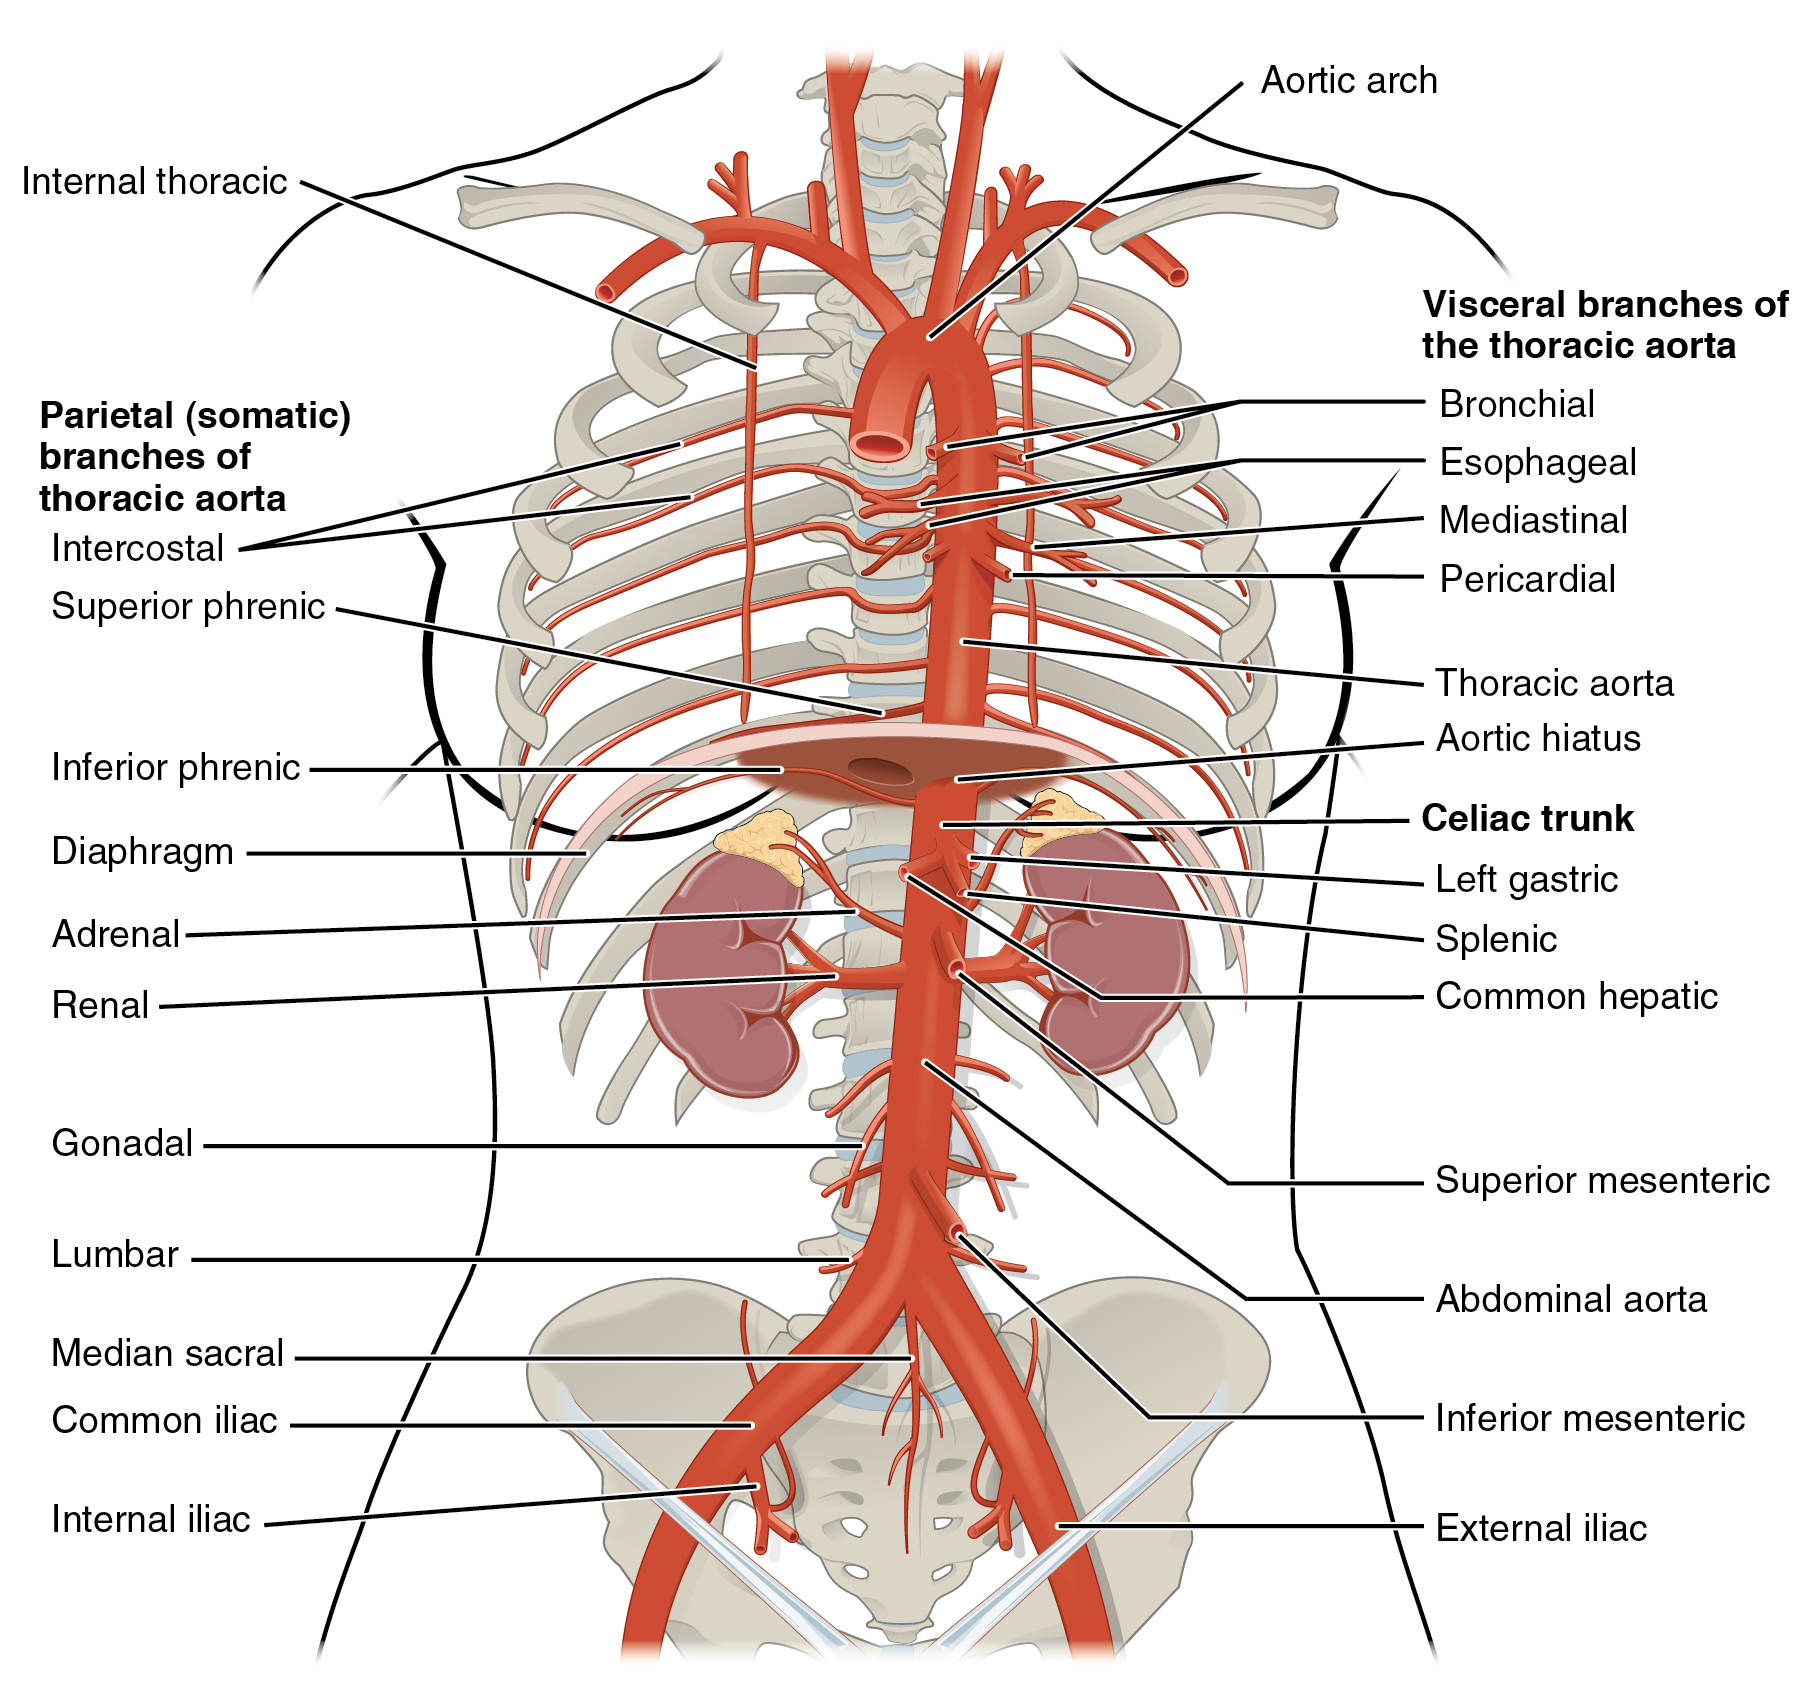 This diagram shows the arteries in the thoracic and abdominal cavity.